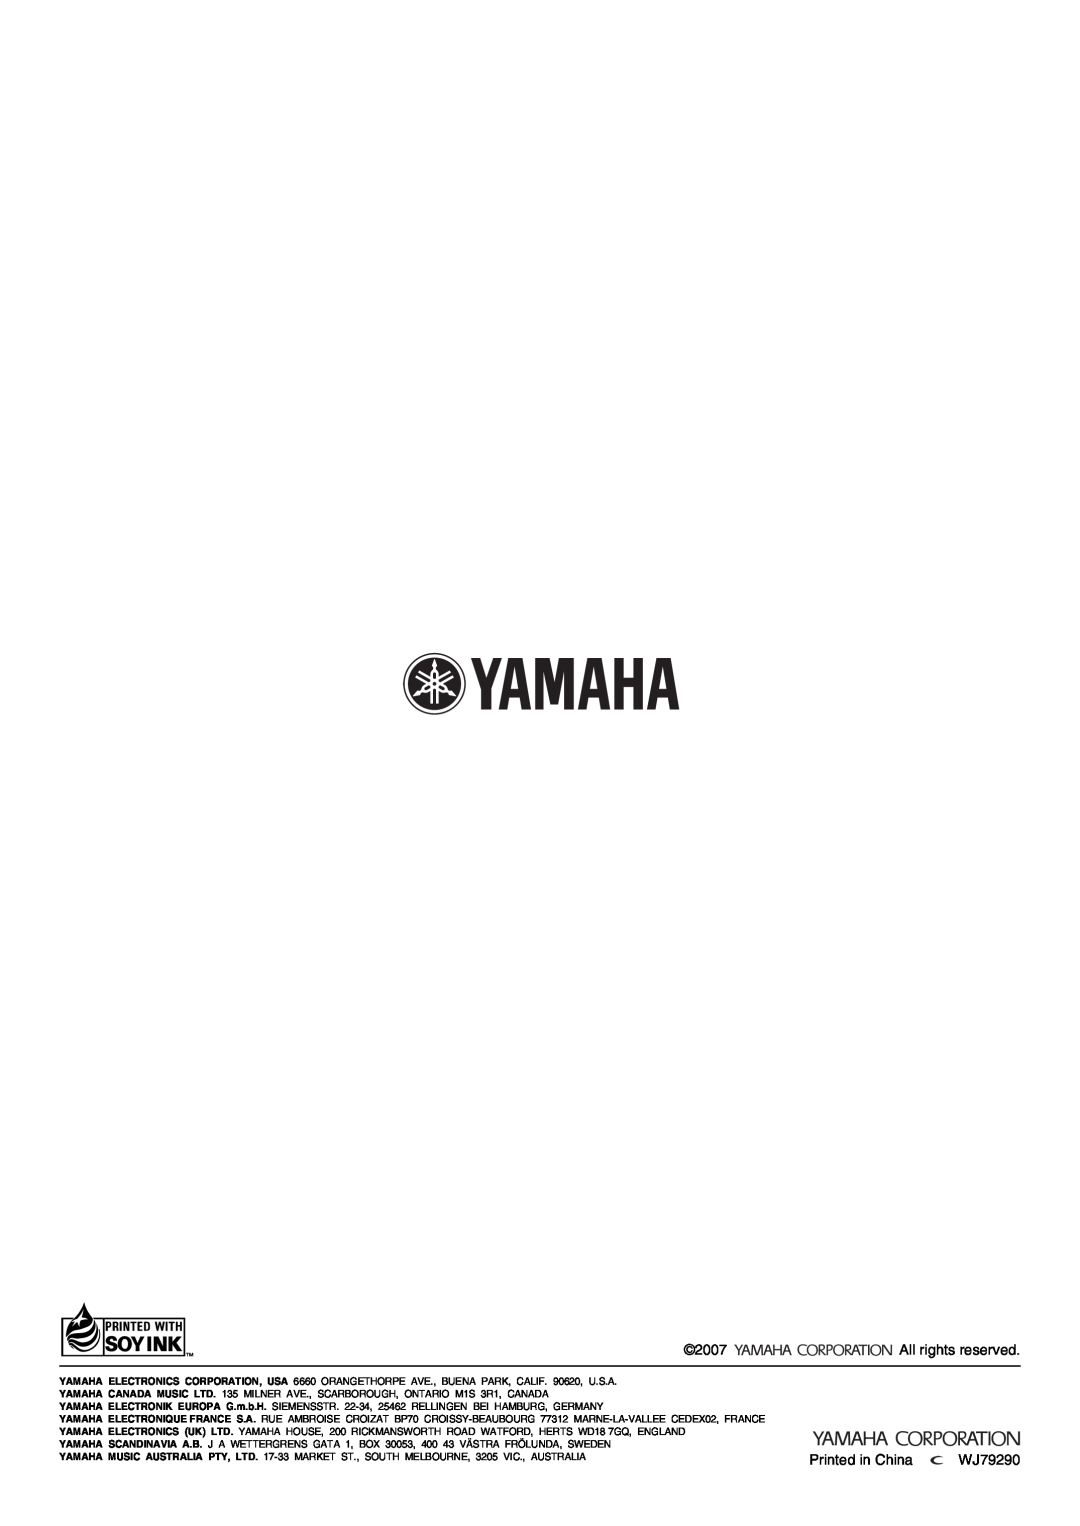 Yamaha NX-U10, Multimedia Speaker owner manual 2007, Printed in China, WJ79290, All rights reserved 